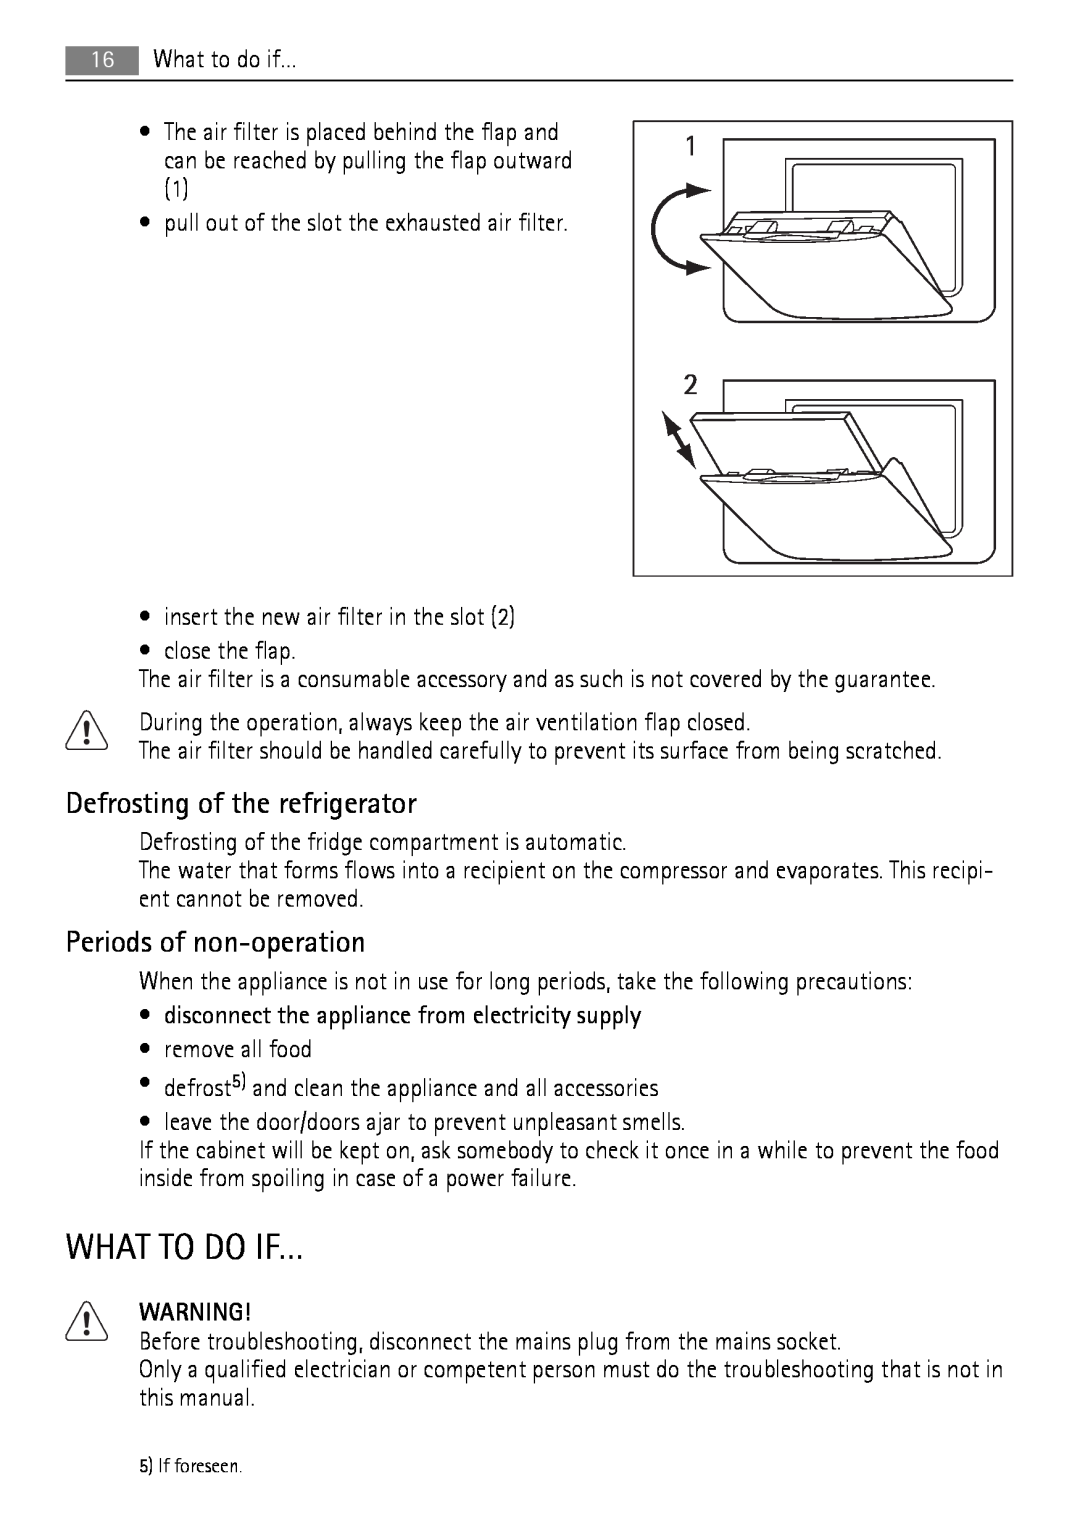 AEG SKZ71800F0 user manual What To Do If…, Defrosting of the refrigerator, Periods of non-operation 